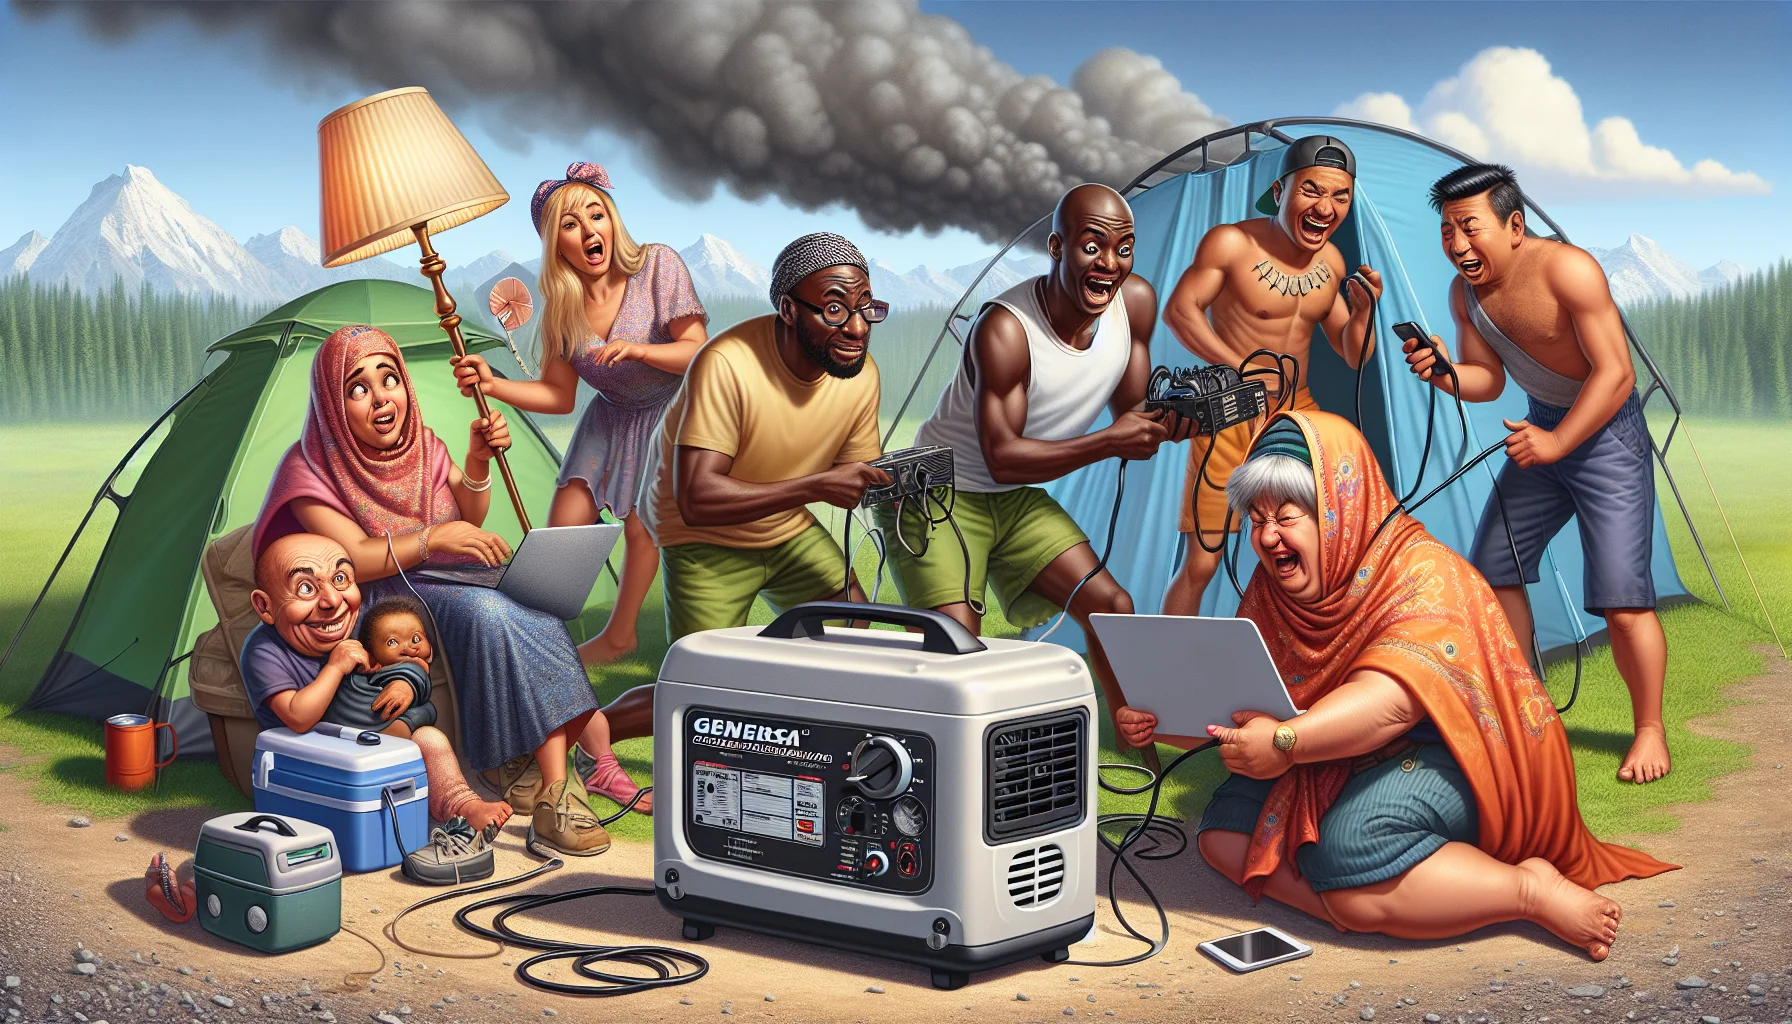 Create an image of a humorous scenario featuring a generic portable generator model, similar to the Pulsar 5250 Generator. Imagine a group of diverse people powering their electronic gadgets in a remote camping location. One person, a Caucasian woman, tries to charge her massive, oversized lamp while a Black male attempts to power a tiny, mini fridge. A Middle-Eastern man looks baffled trying to connect his old television set. South-Asian woman is laughing while charging her laptop. The scene should elicit laughter and highlight the absurdity of using heavy home appliances in an isolated, outdoorsy setup, thus enticing people to generate electricity.